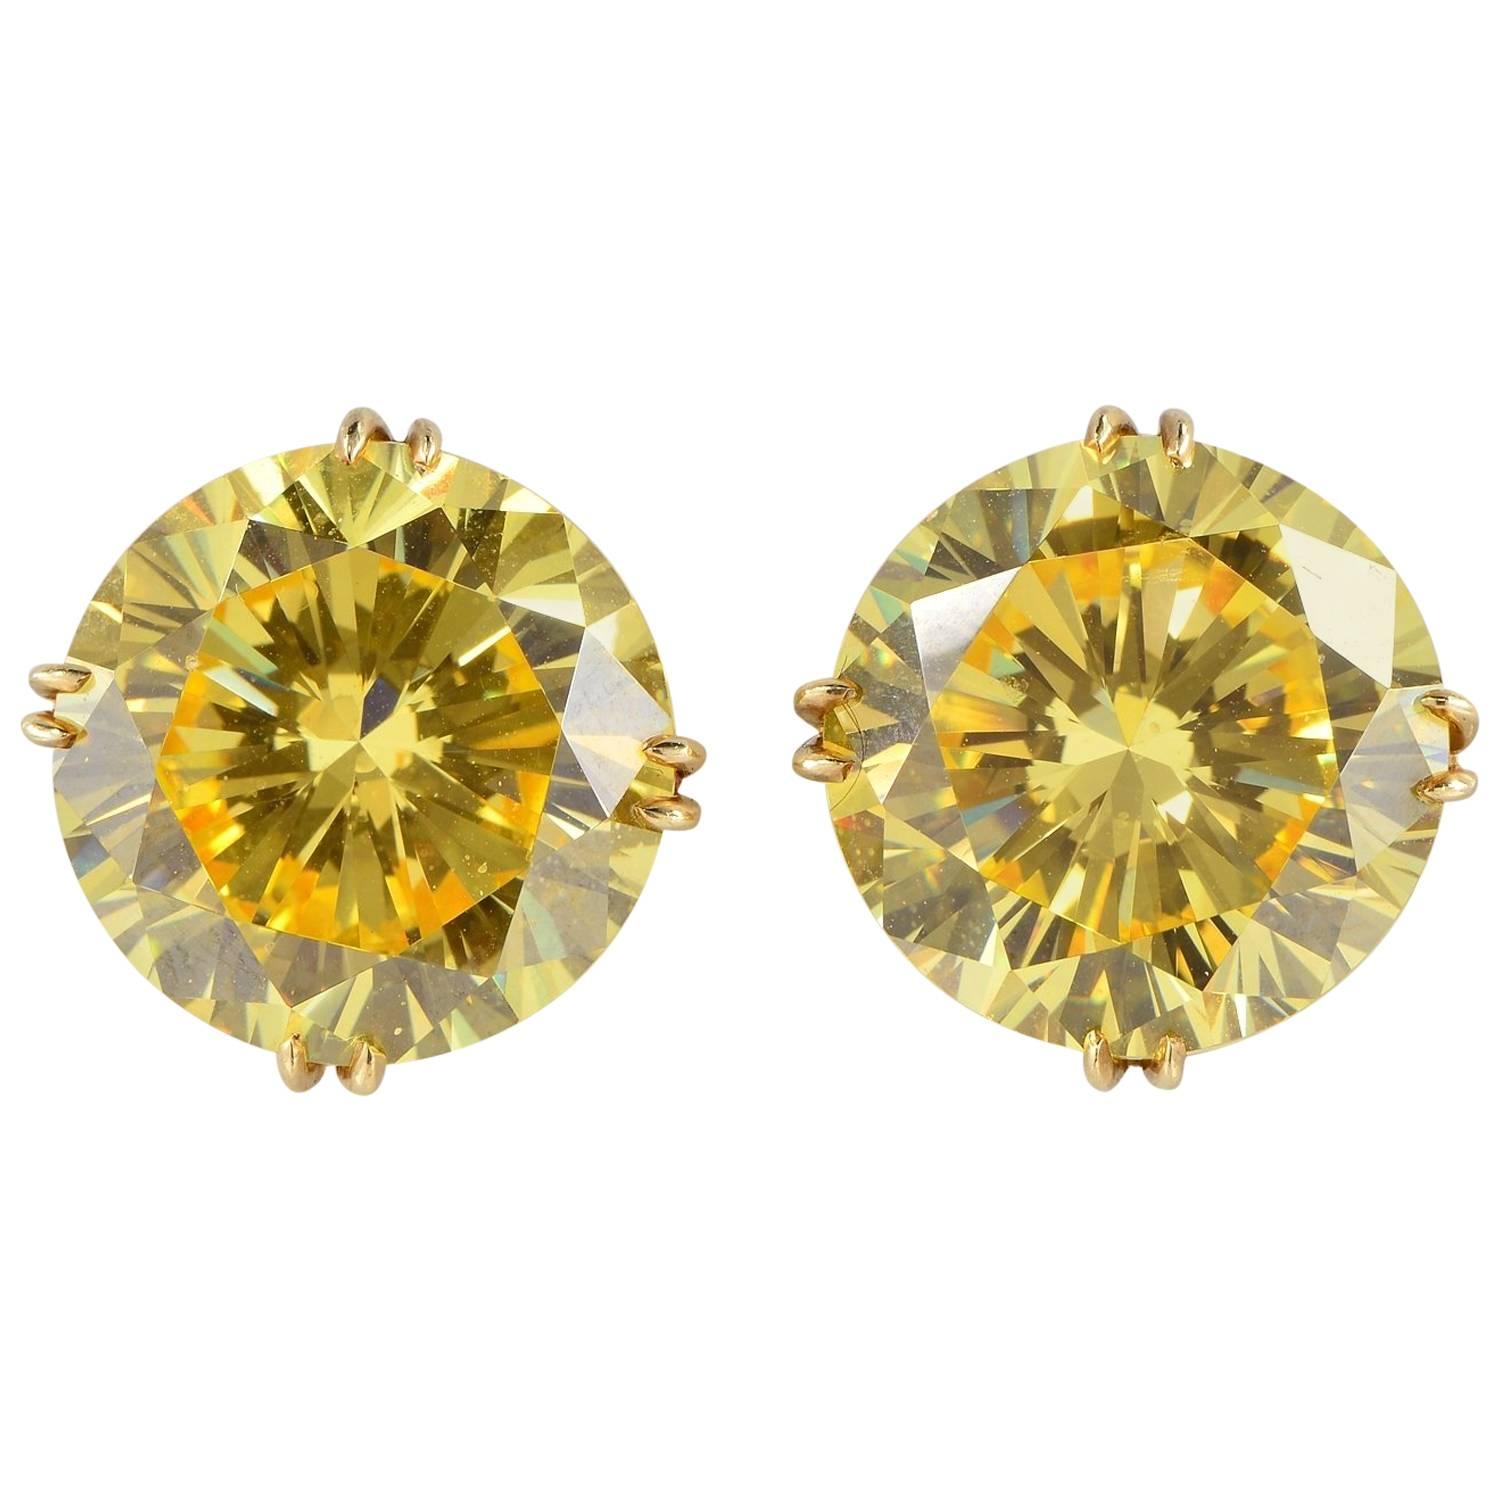 Exceptional Pair 41.60 Carat of Rare Mali Garnet Stud Earrings For Sale